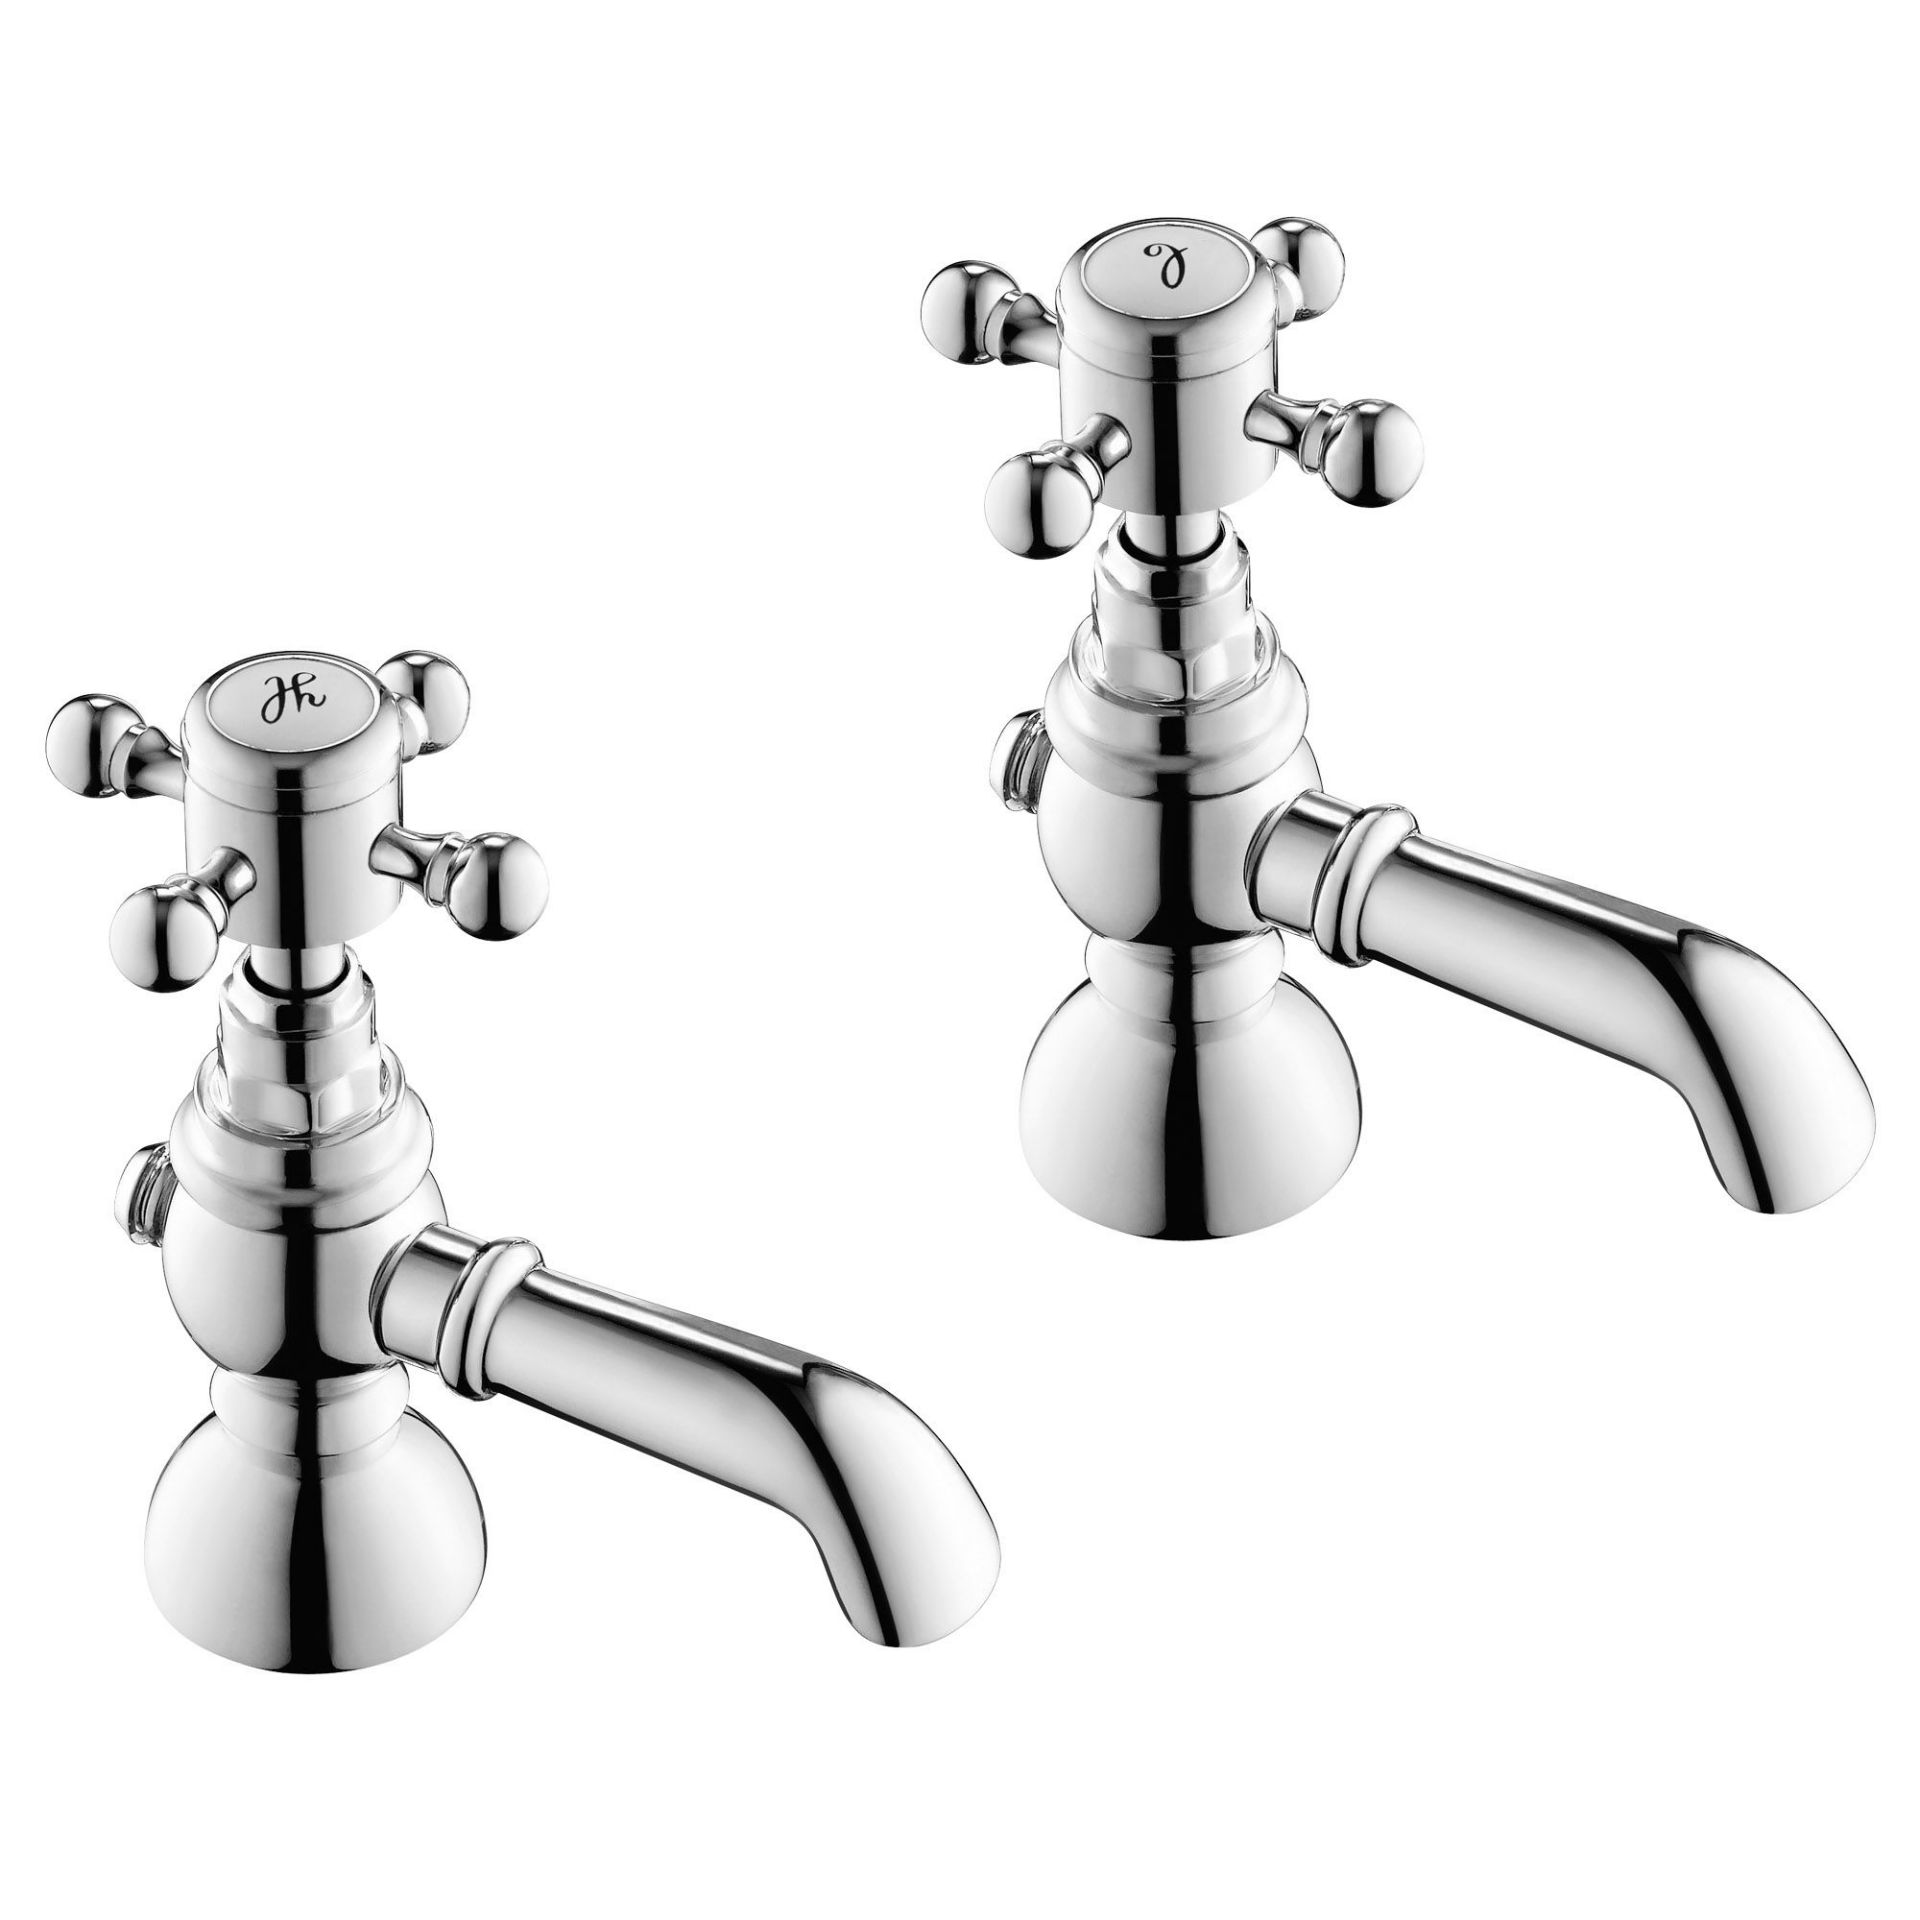 (PM1017) Cambridge Traditional Hot and Cold Sink Taps Chrome Plated Solid Brass Traditional d... - Image 2 of 4